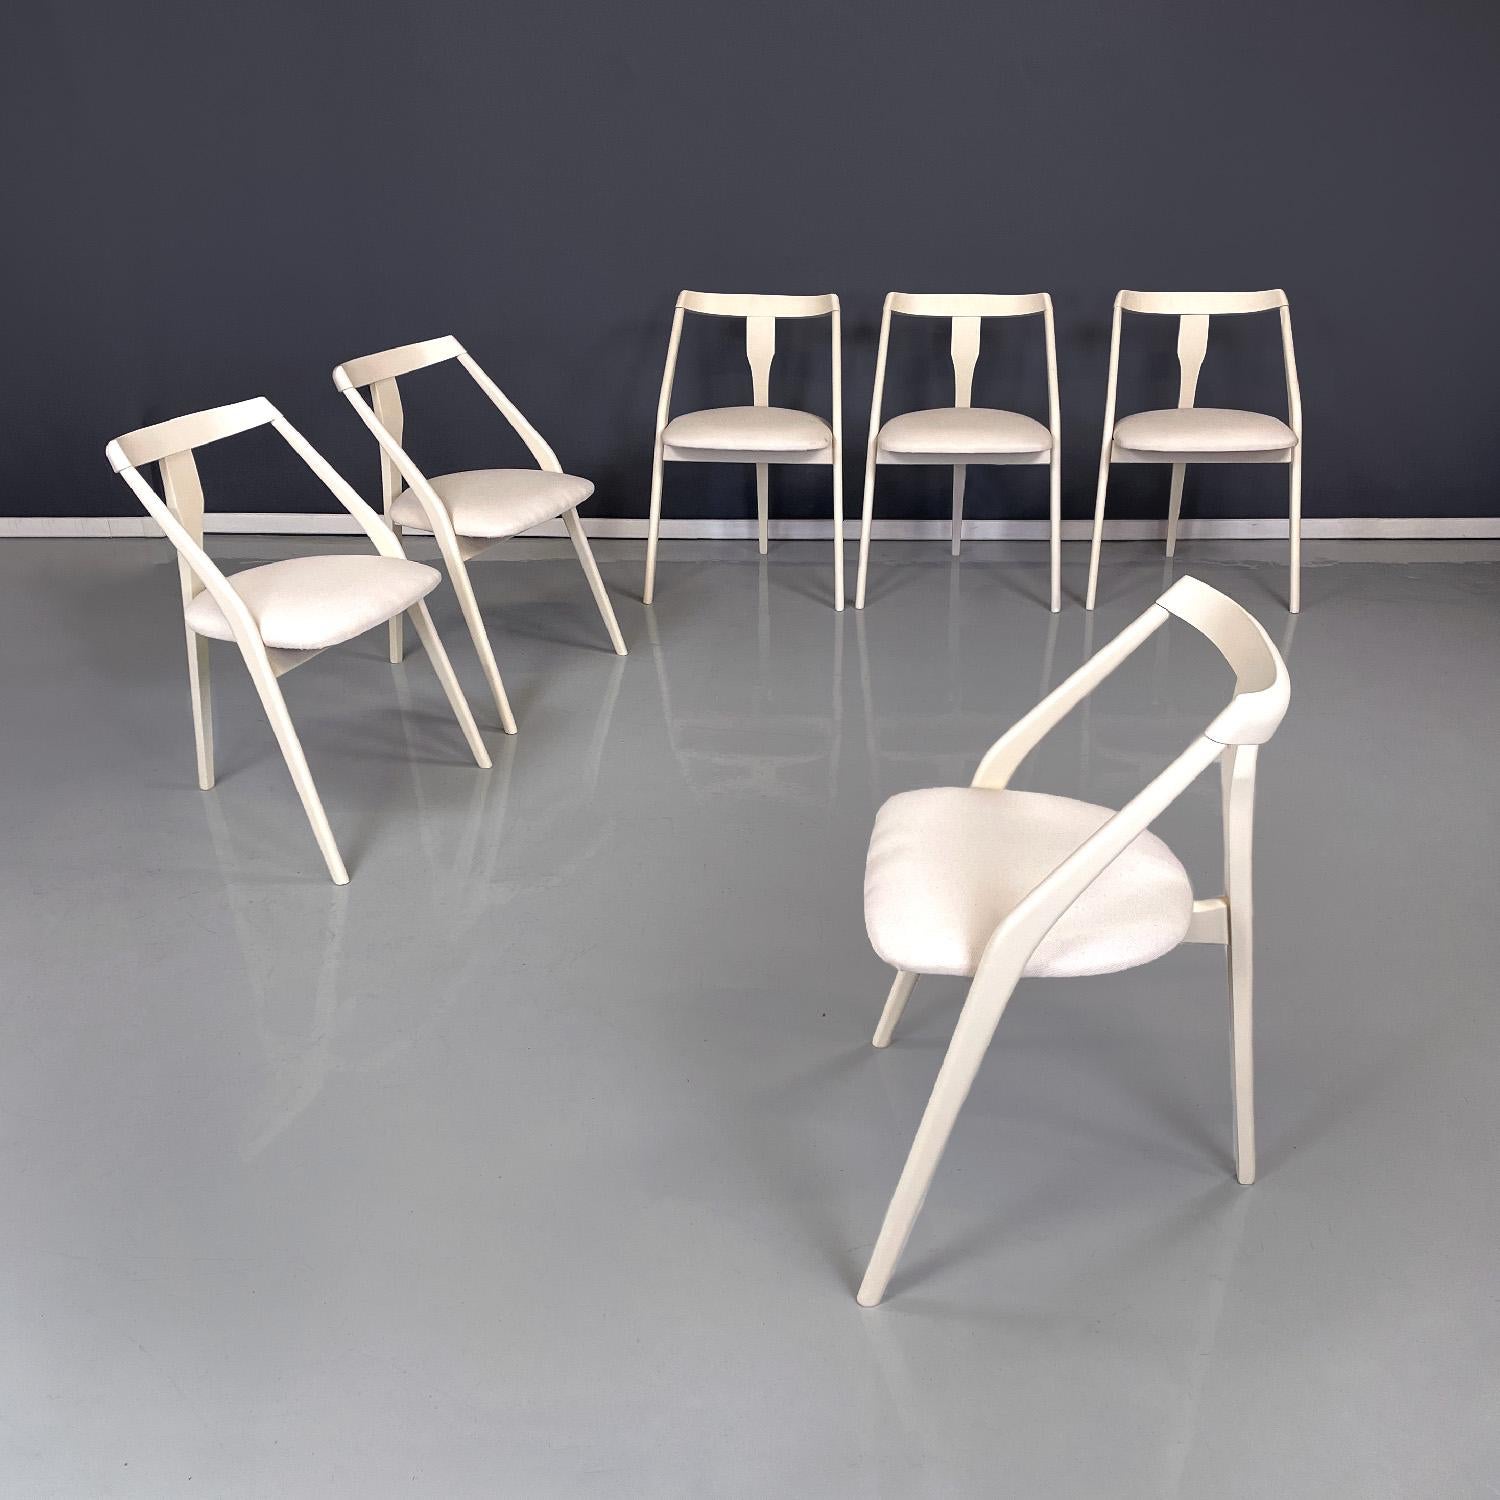 Italian mid-century modern white wood and fabric chairs, 1960s
Set of six chairs with white lacquered wooden structure with matt finish. The seat is rounded and covered in white fabric, the backrest is made up of a rectangular section strip that